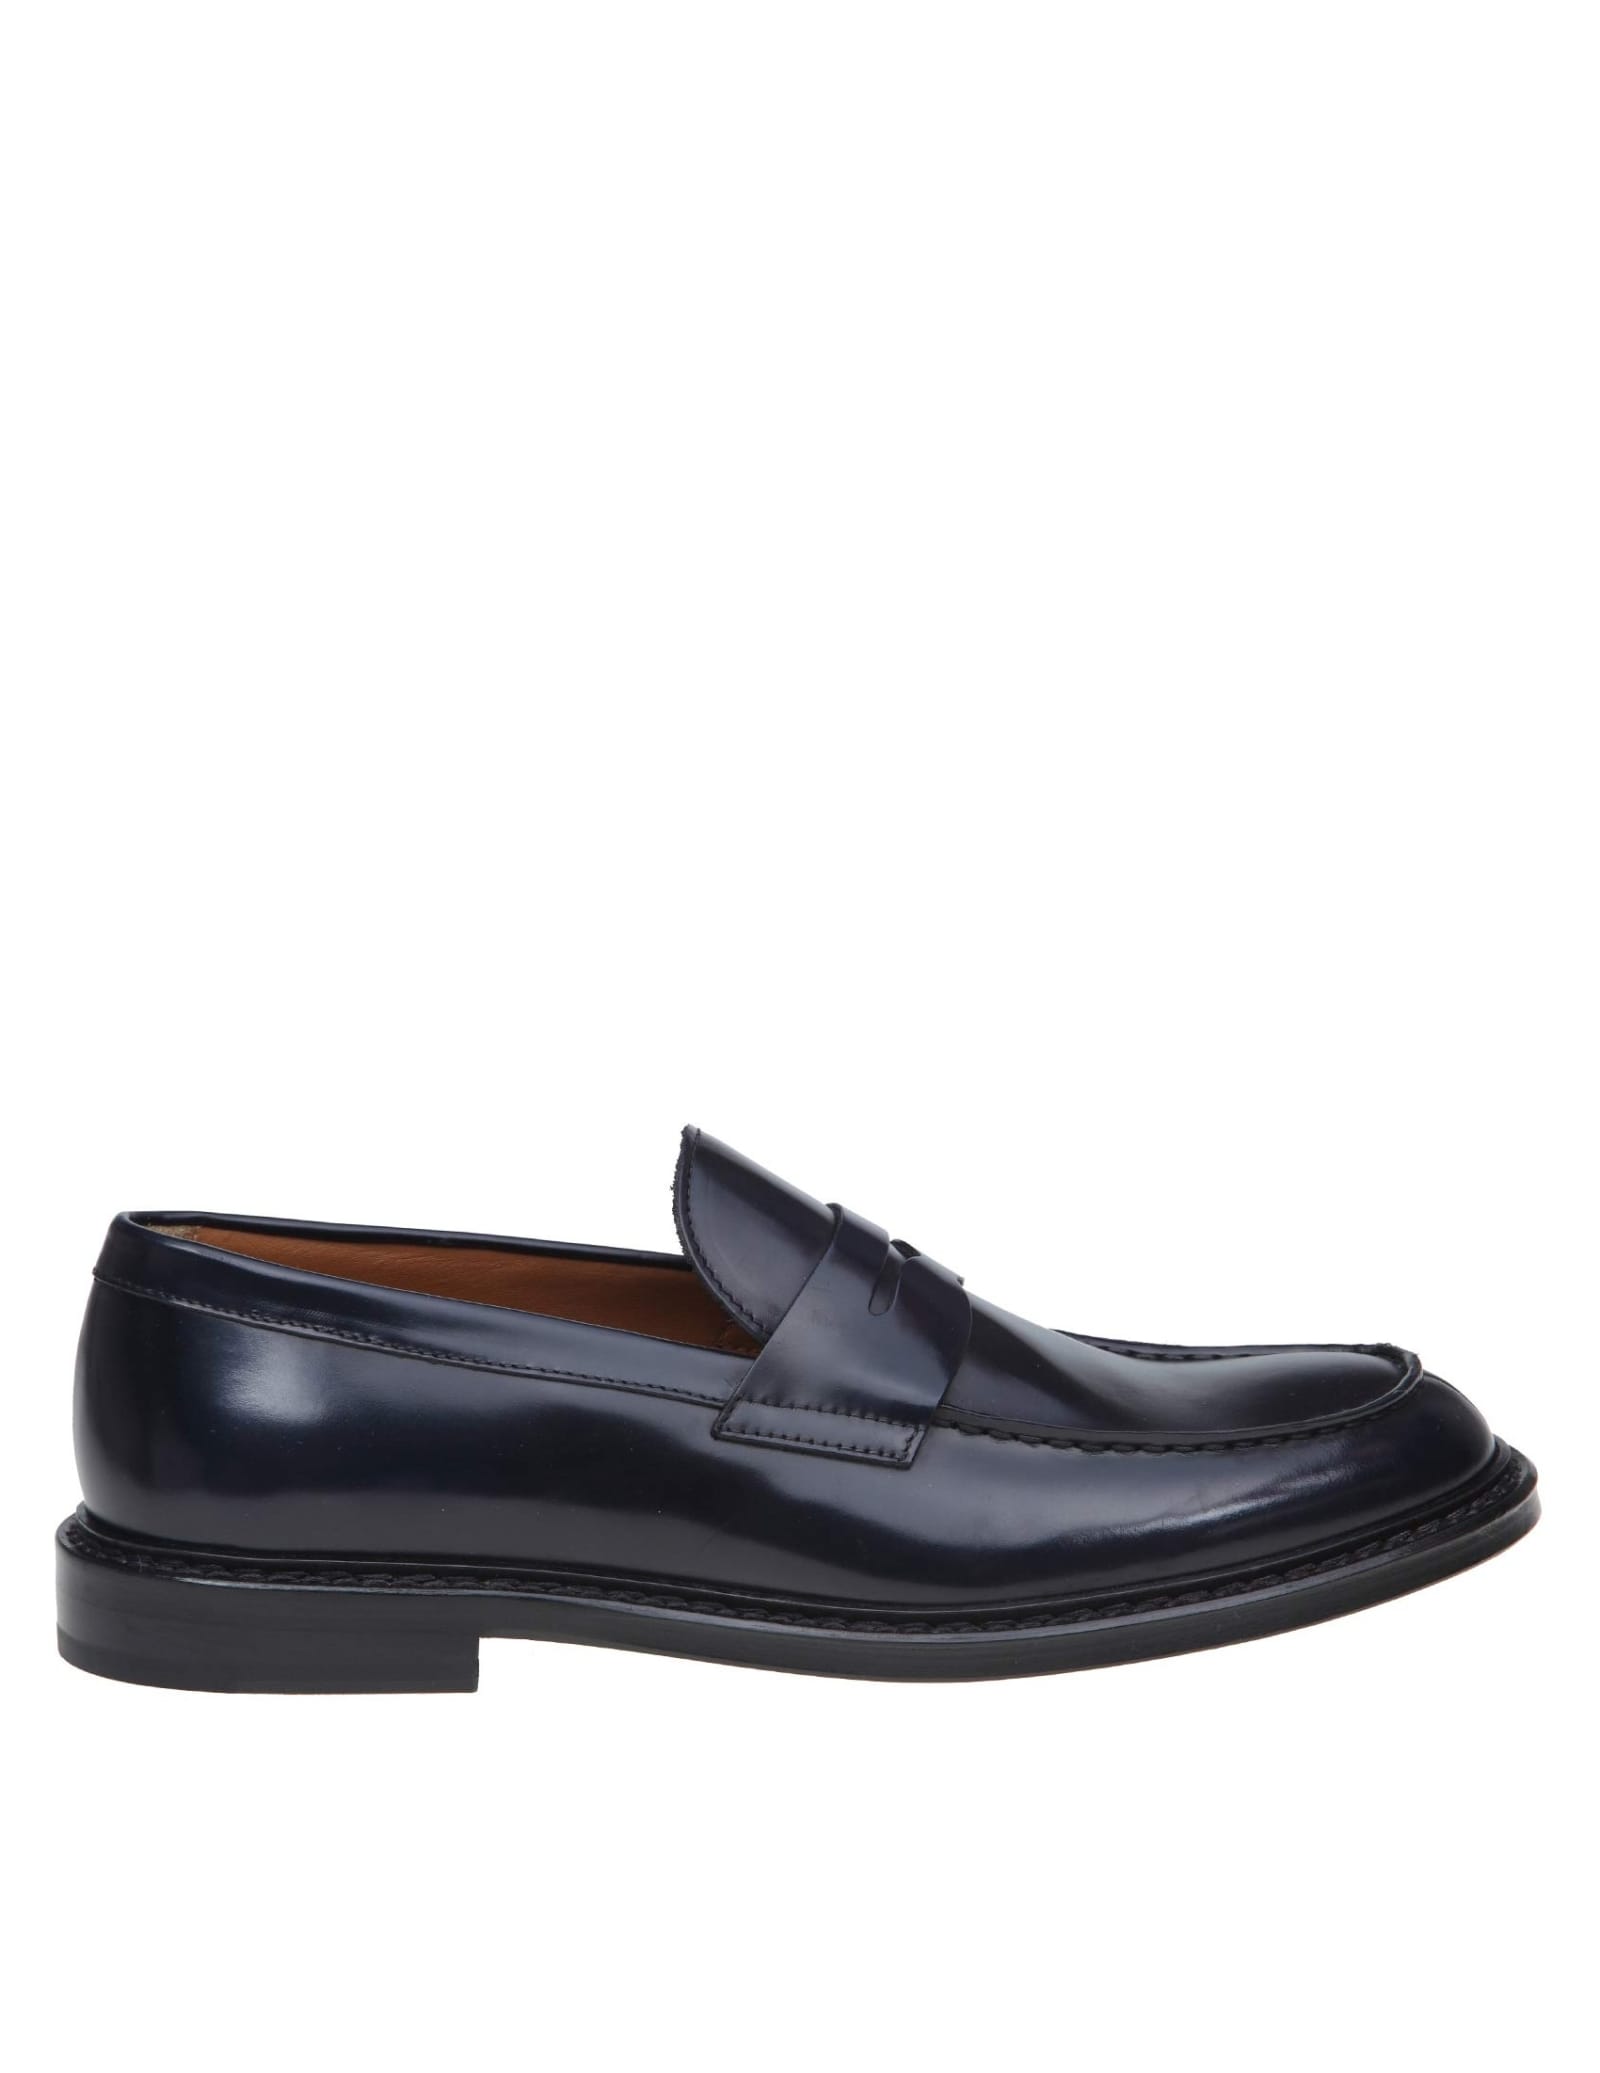 DOUCAL'S LOAFERS IN BLUE BRUSHED CALFSKIN